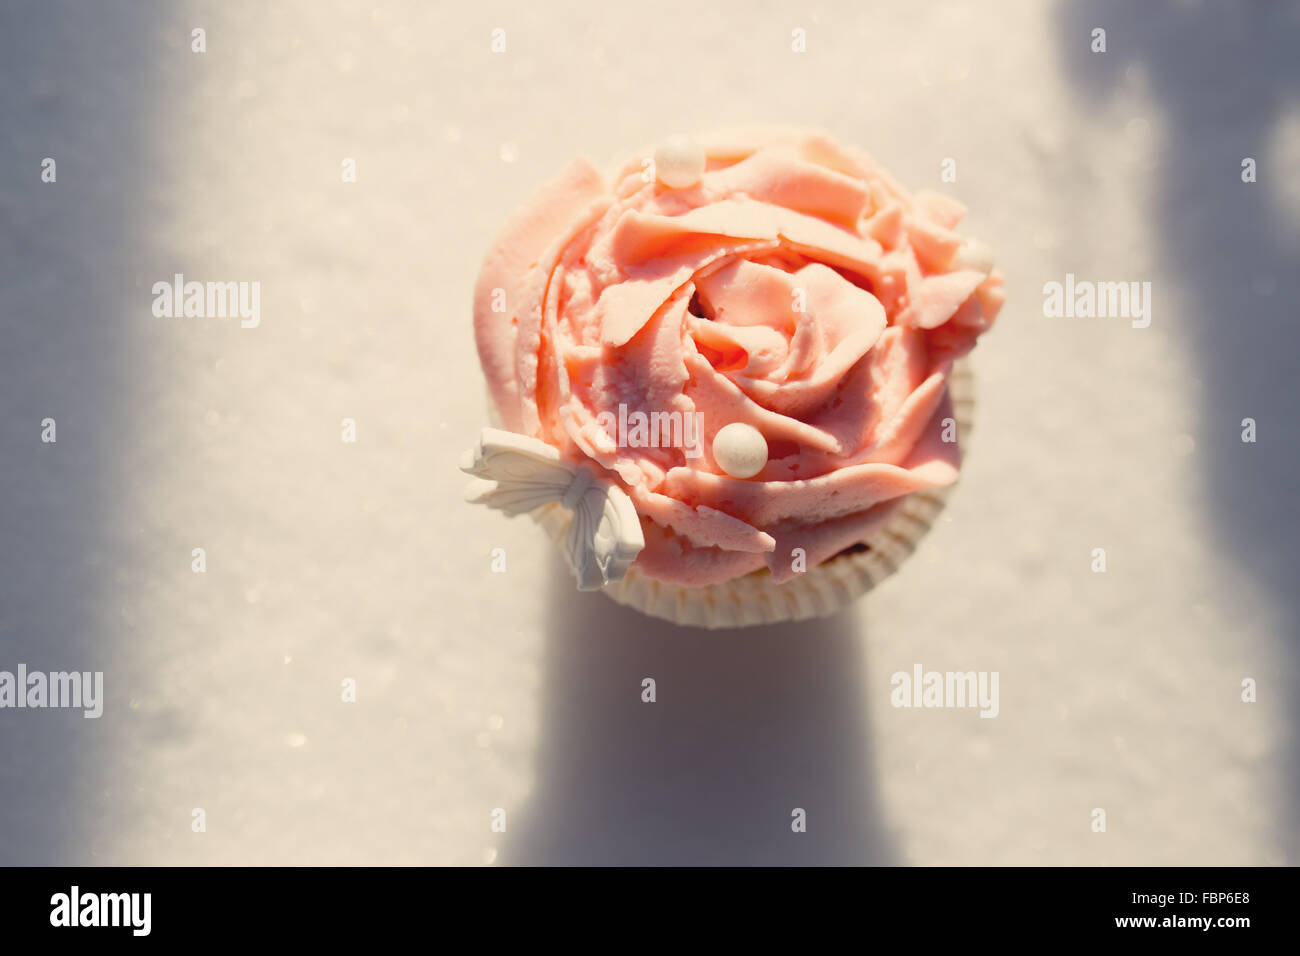 Outdoor photo of cupcake decorated with a sugar butterfly. Cupca Stock Photo